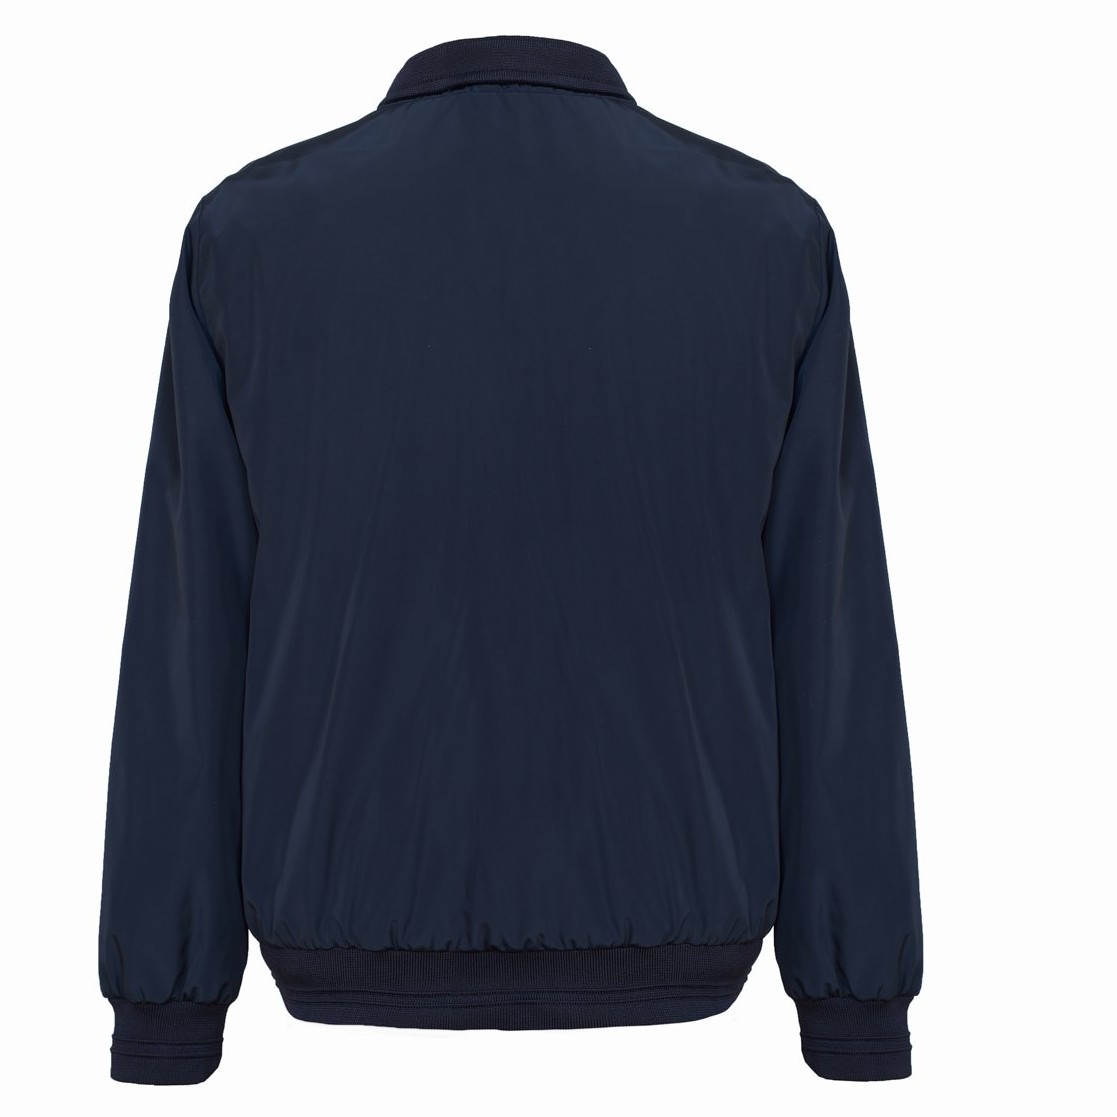 Unisex Fine Polyester Jacket - Delicias Style - Navy Blue